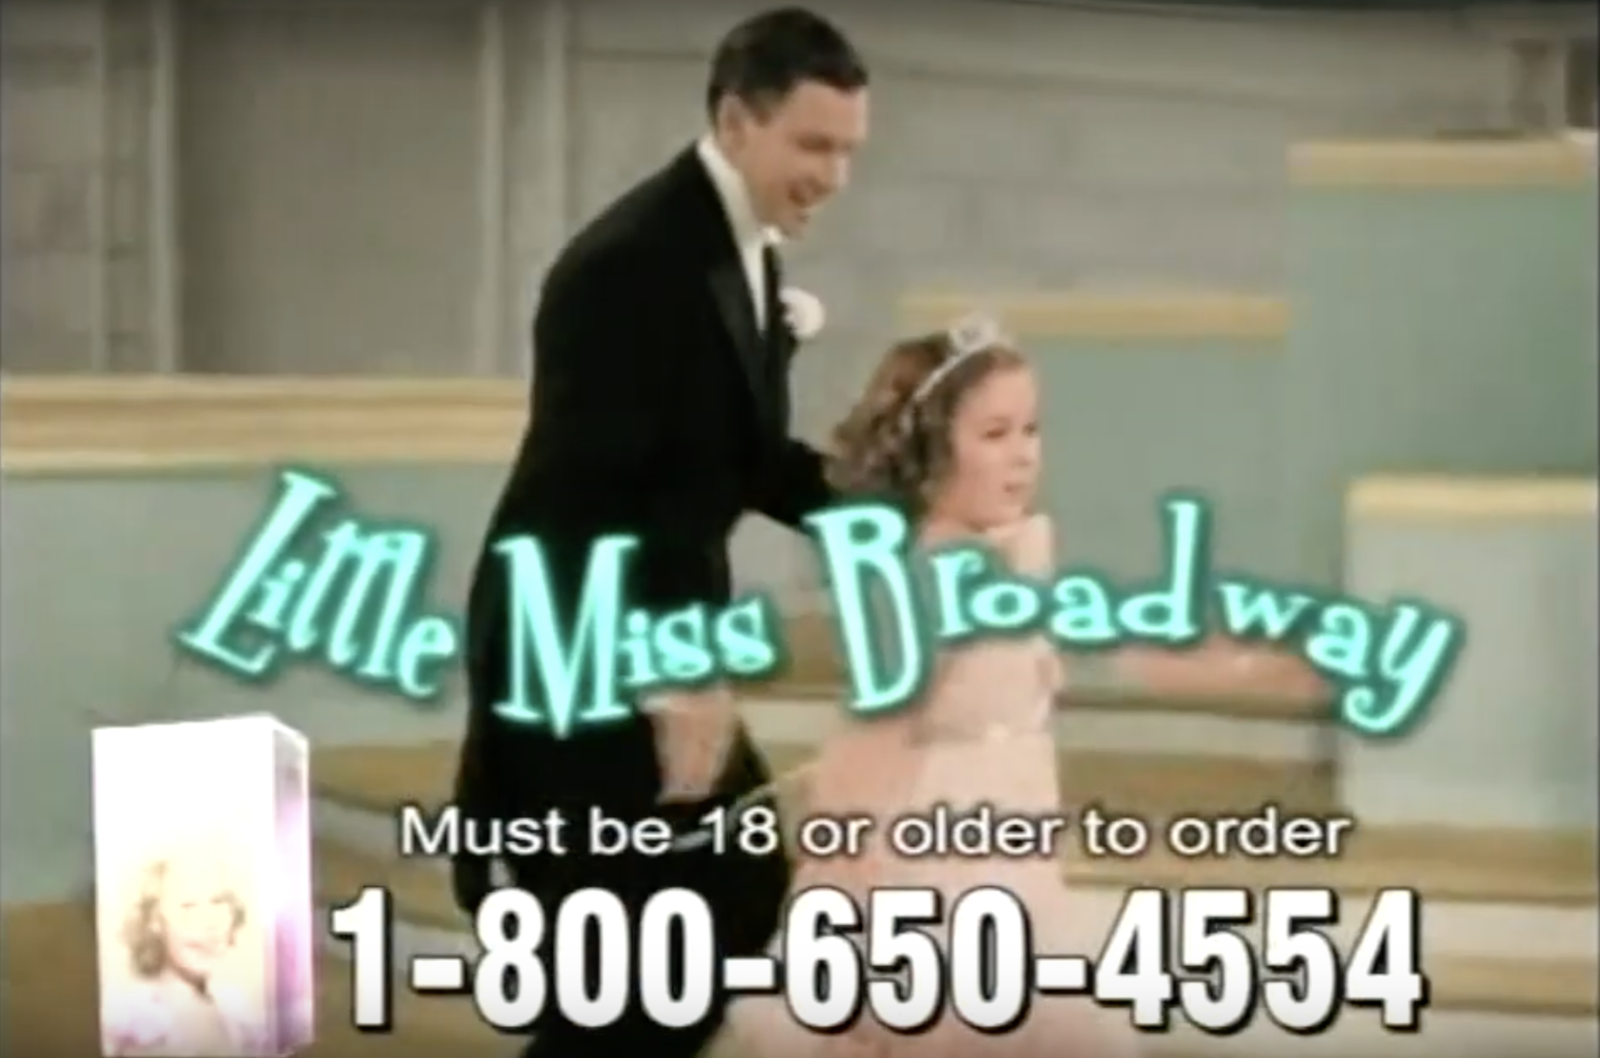 A screen grab of the commercial with Shirley Temple holding a dancer&#x27;s hand and &quot;Little Miss Broadway&quot; written over her